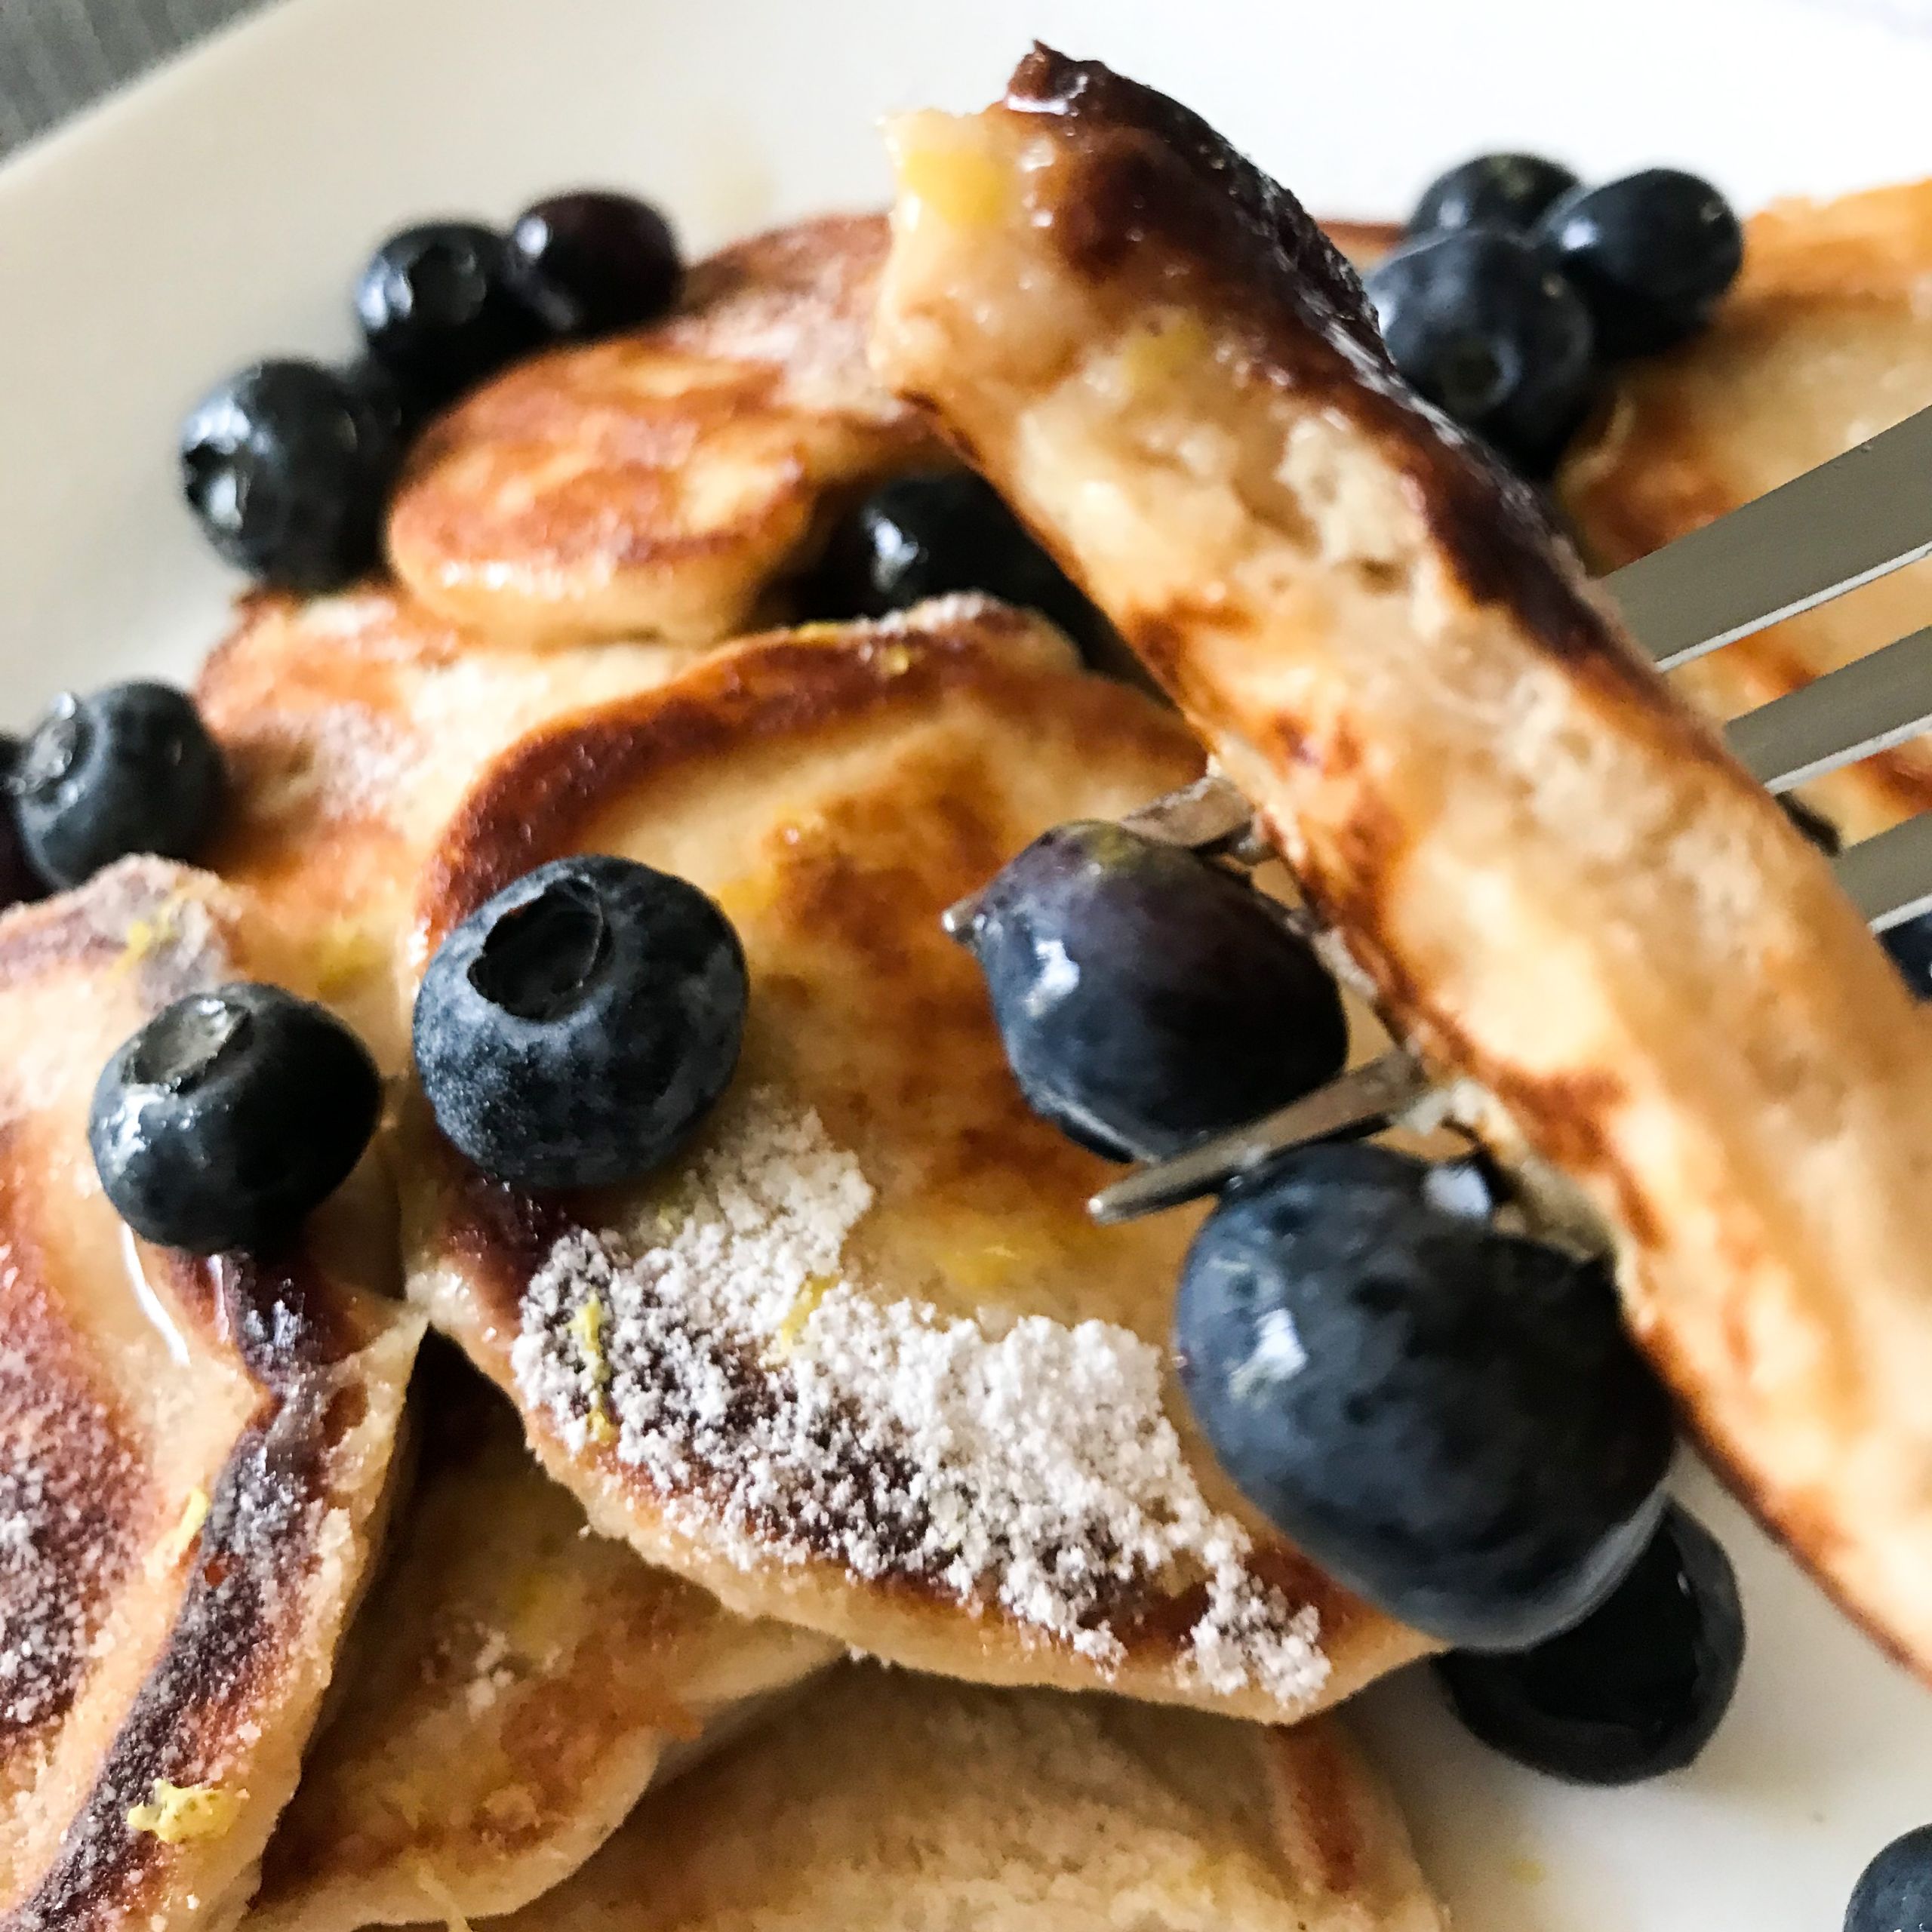 forkful of pancakes, syrup and berries